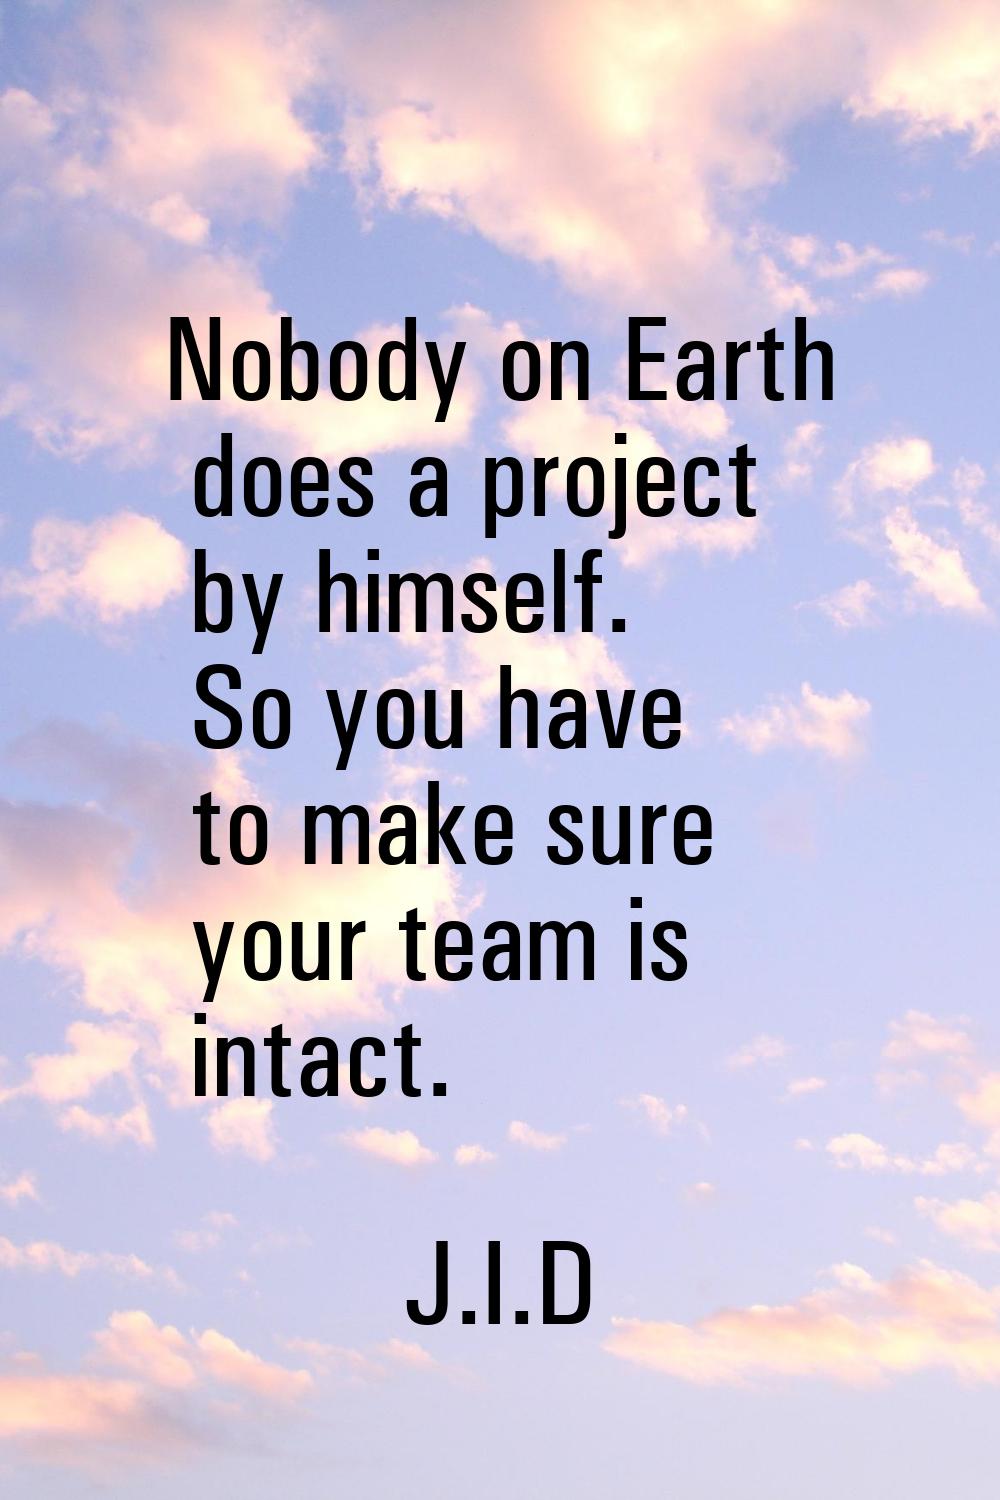 Nobody on Earth does a project by himself. So you have to make sure your team is intact.